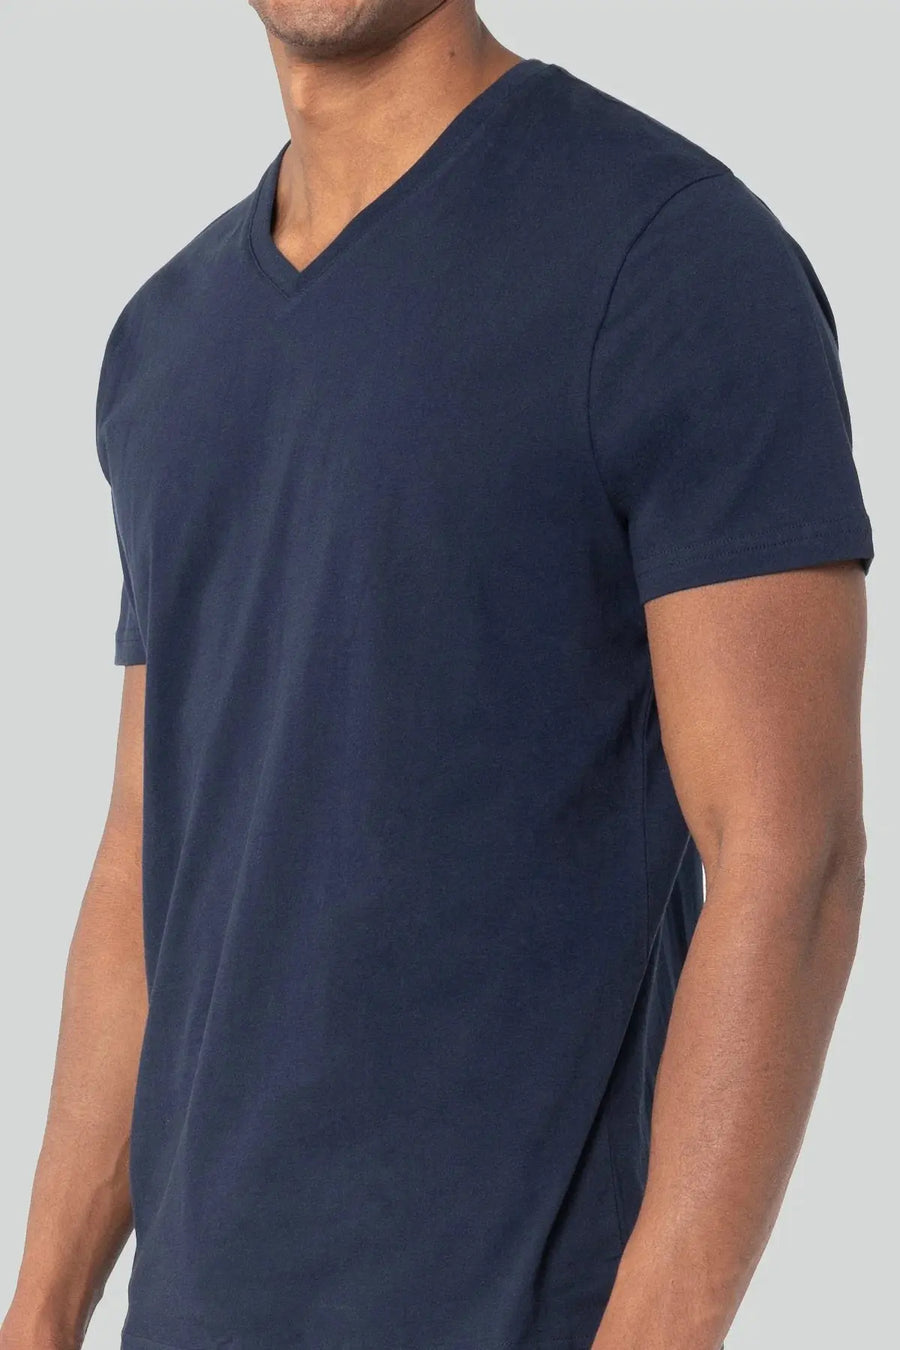 PURE & SIMPLE | Organic Cotton V Neck T-Shirt Navy Pure & Simple